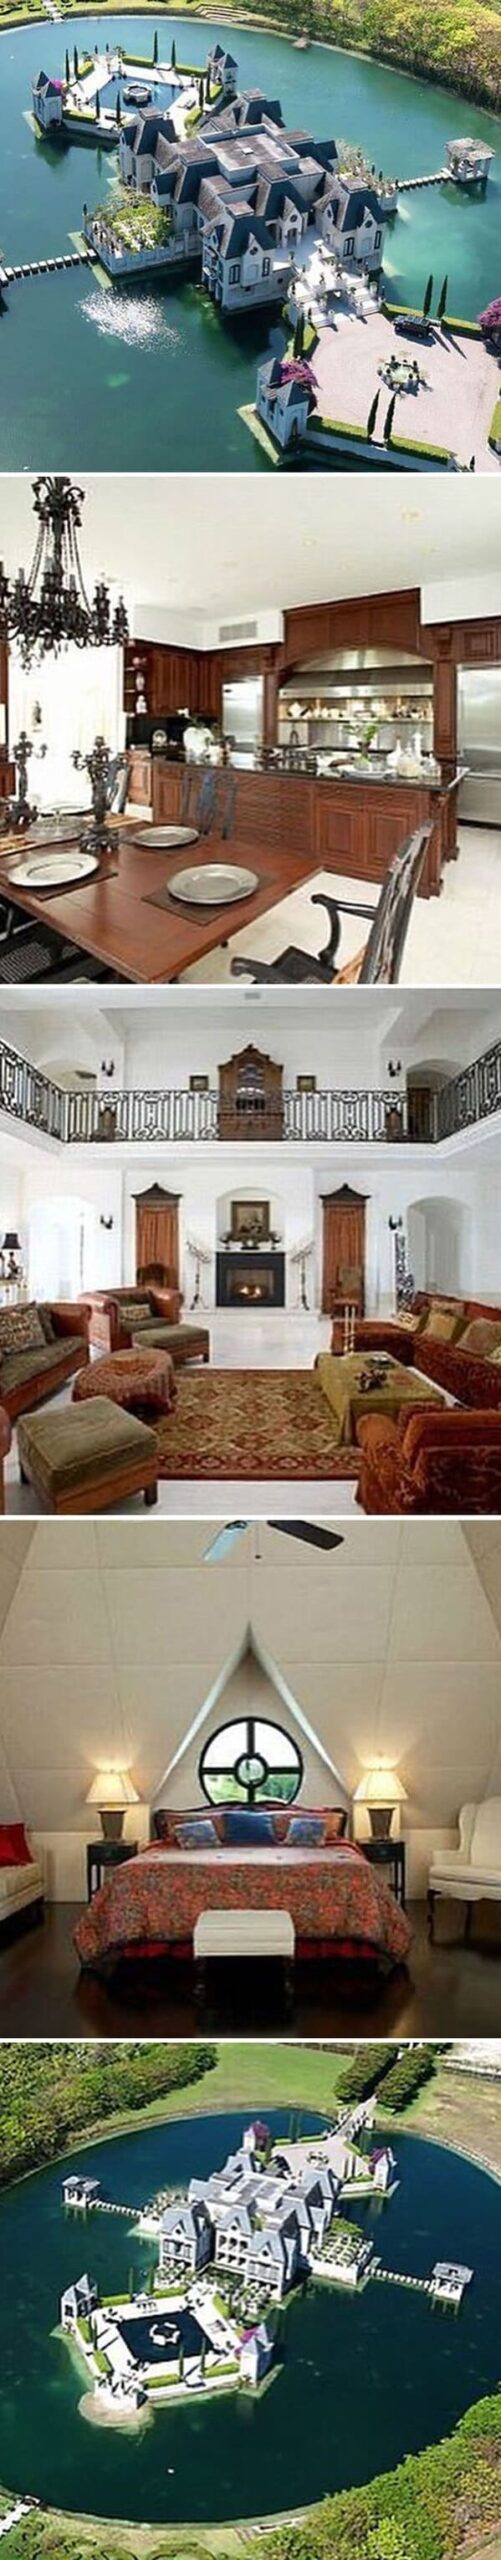 whole island, Zillow gone wild, weird and funny real estate listings, real estate agents who did extra, lol, funny pics of houses, ridiculous houses to buy, zillowgonewild, instagram, humor, funny pics